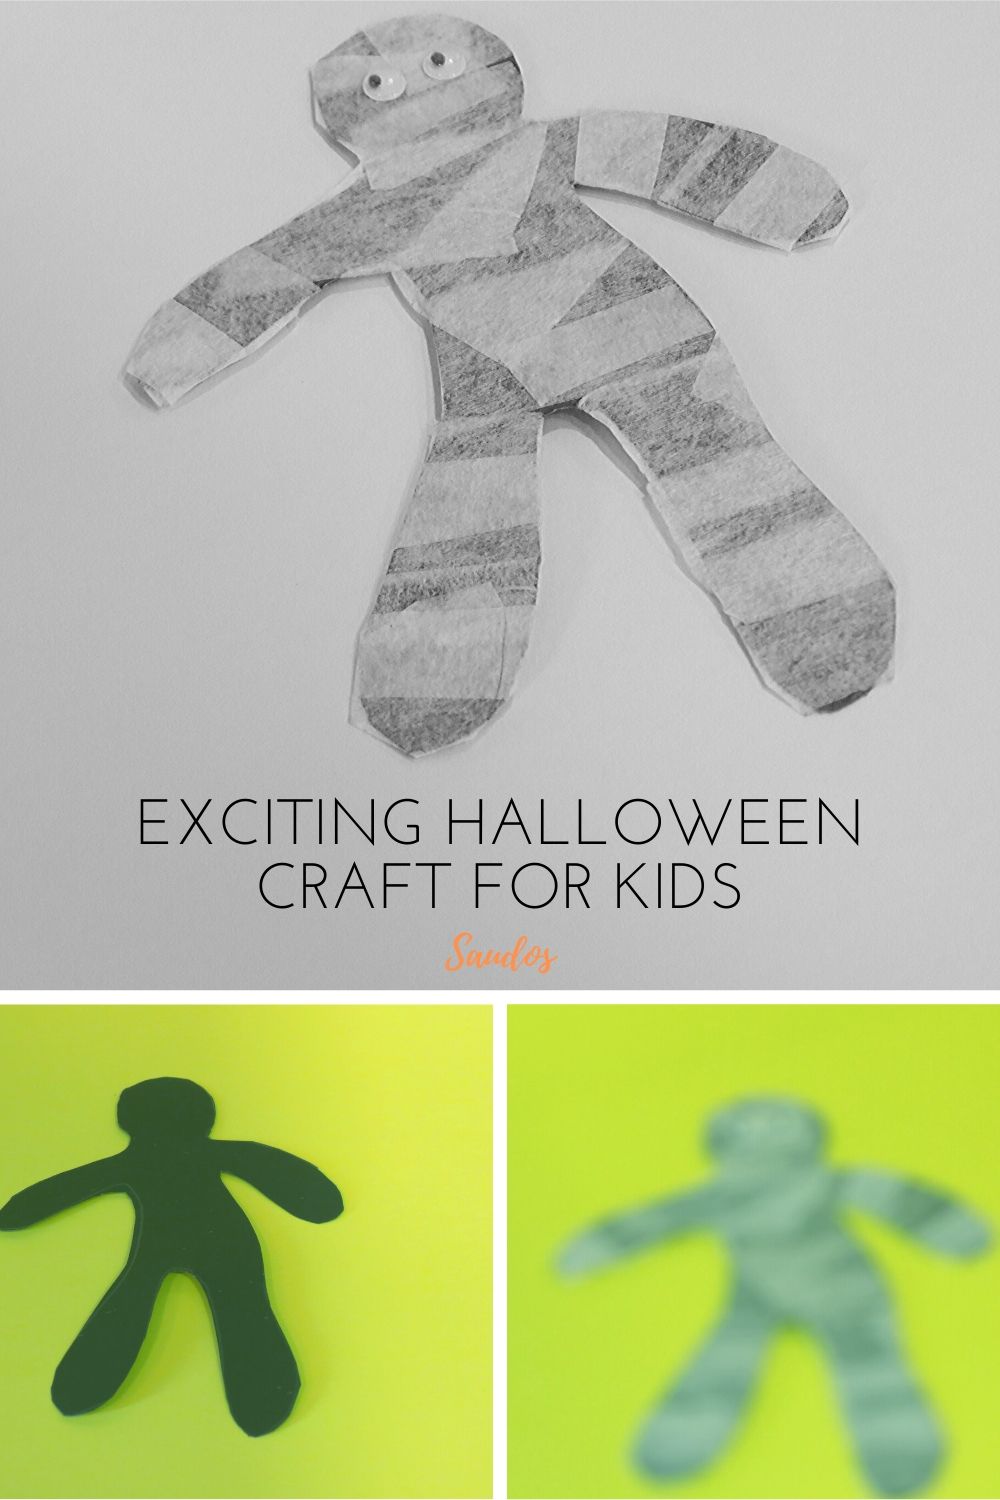 Exciting Halloween craft for Kids